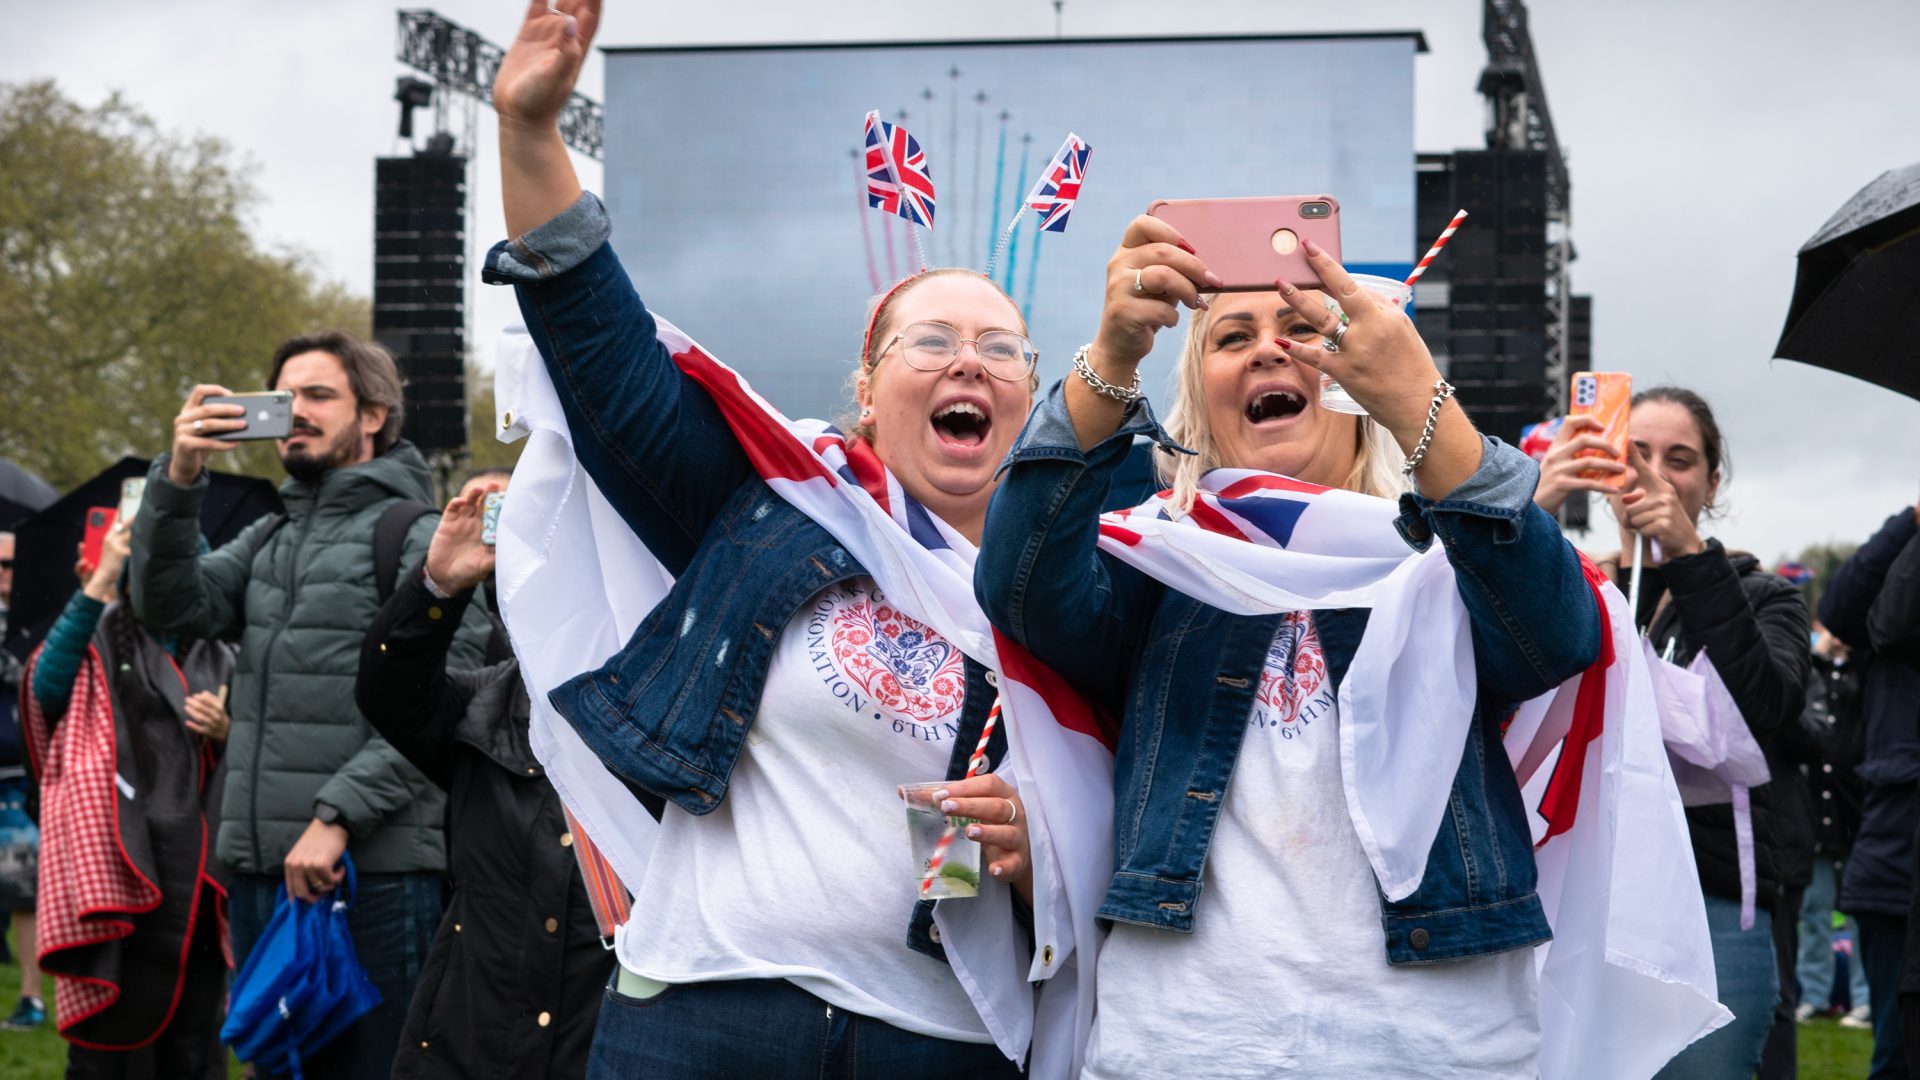 Two women pose for a selfie in the crowds.